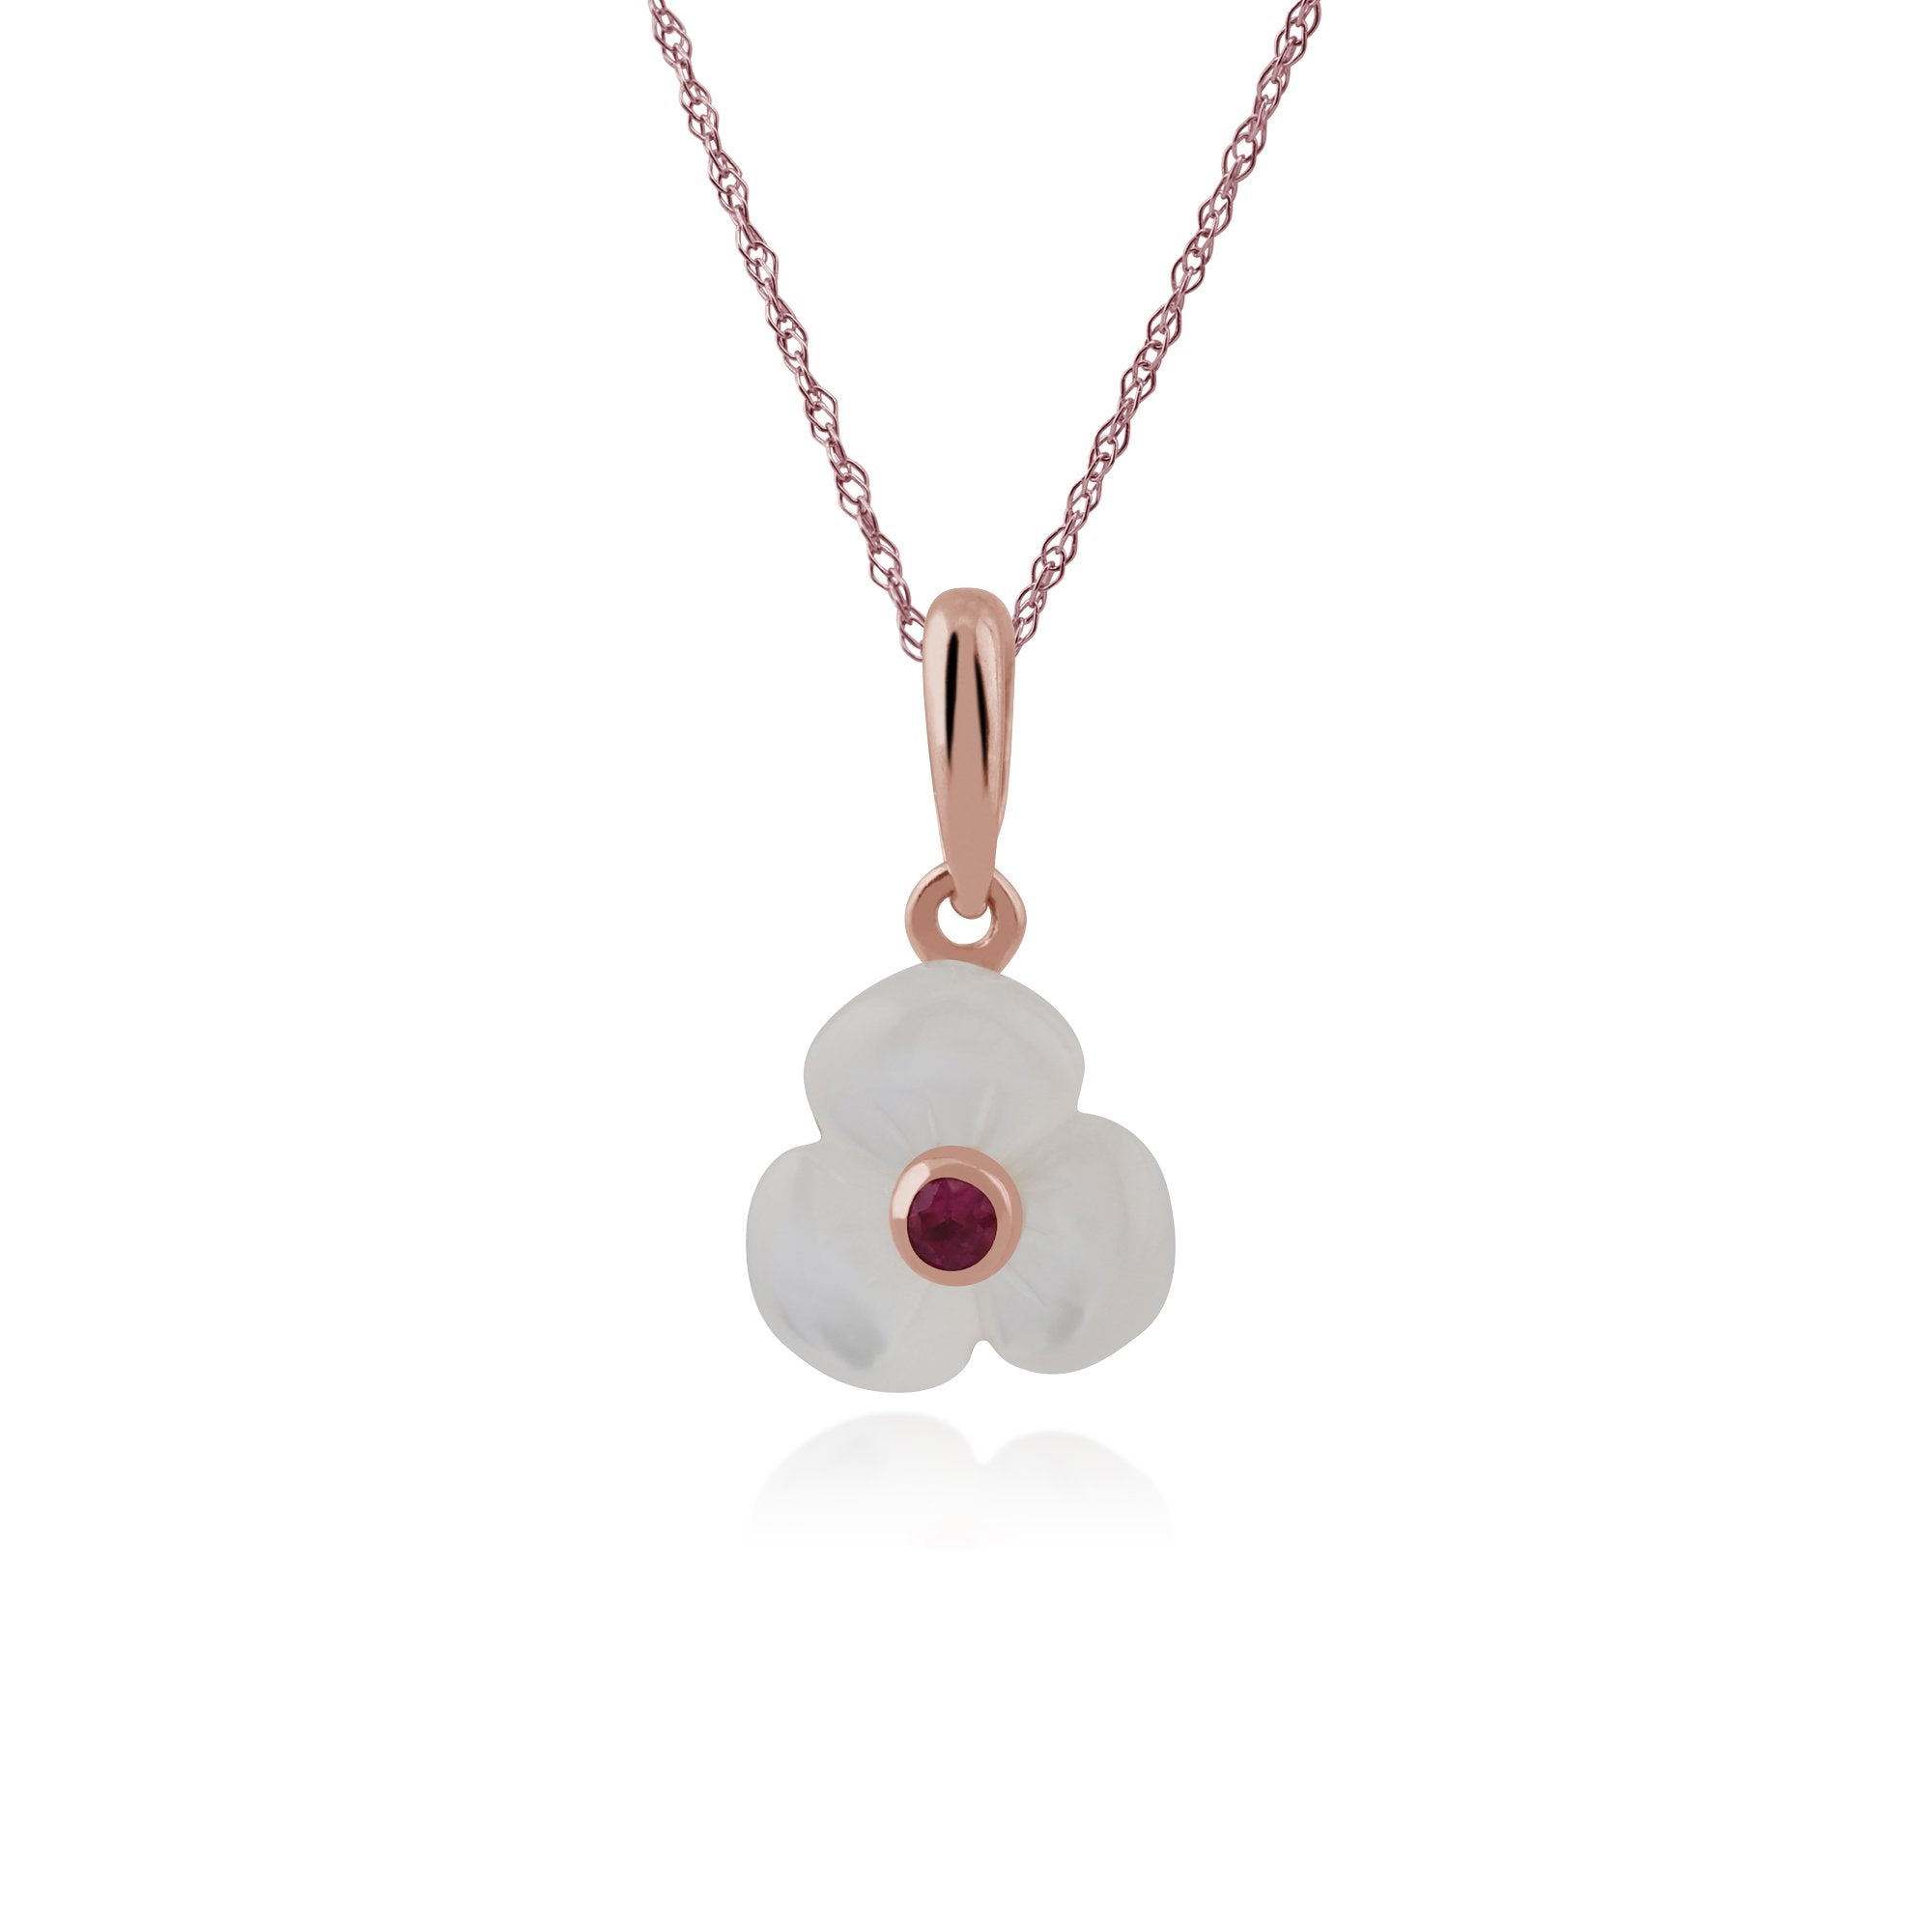 Floral Round Ruby & Mother of Pearl Daisy Pendant & Bracelet Set in Rose Gold Plated 925 Sterling Silver